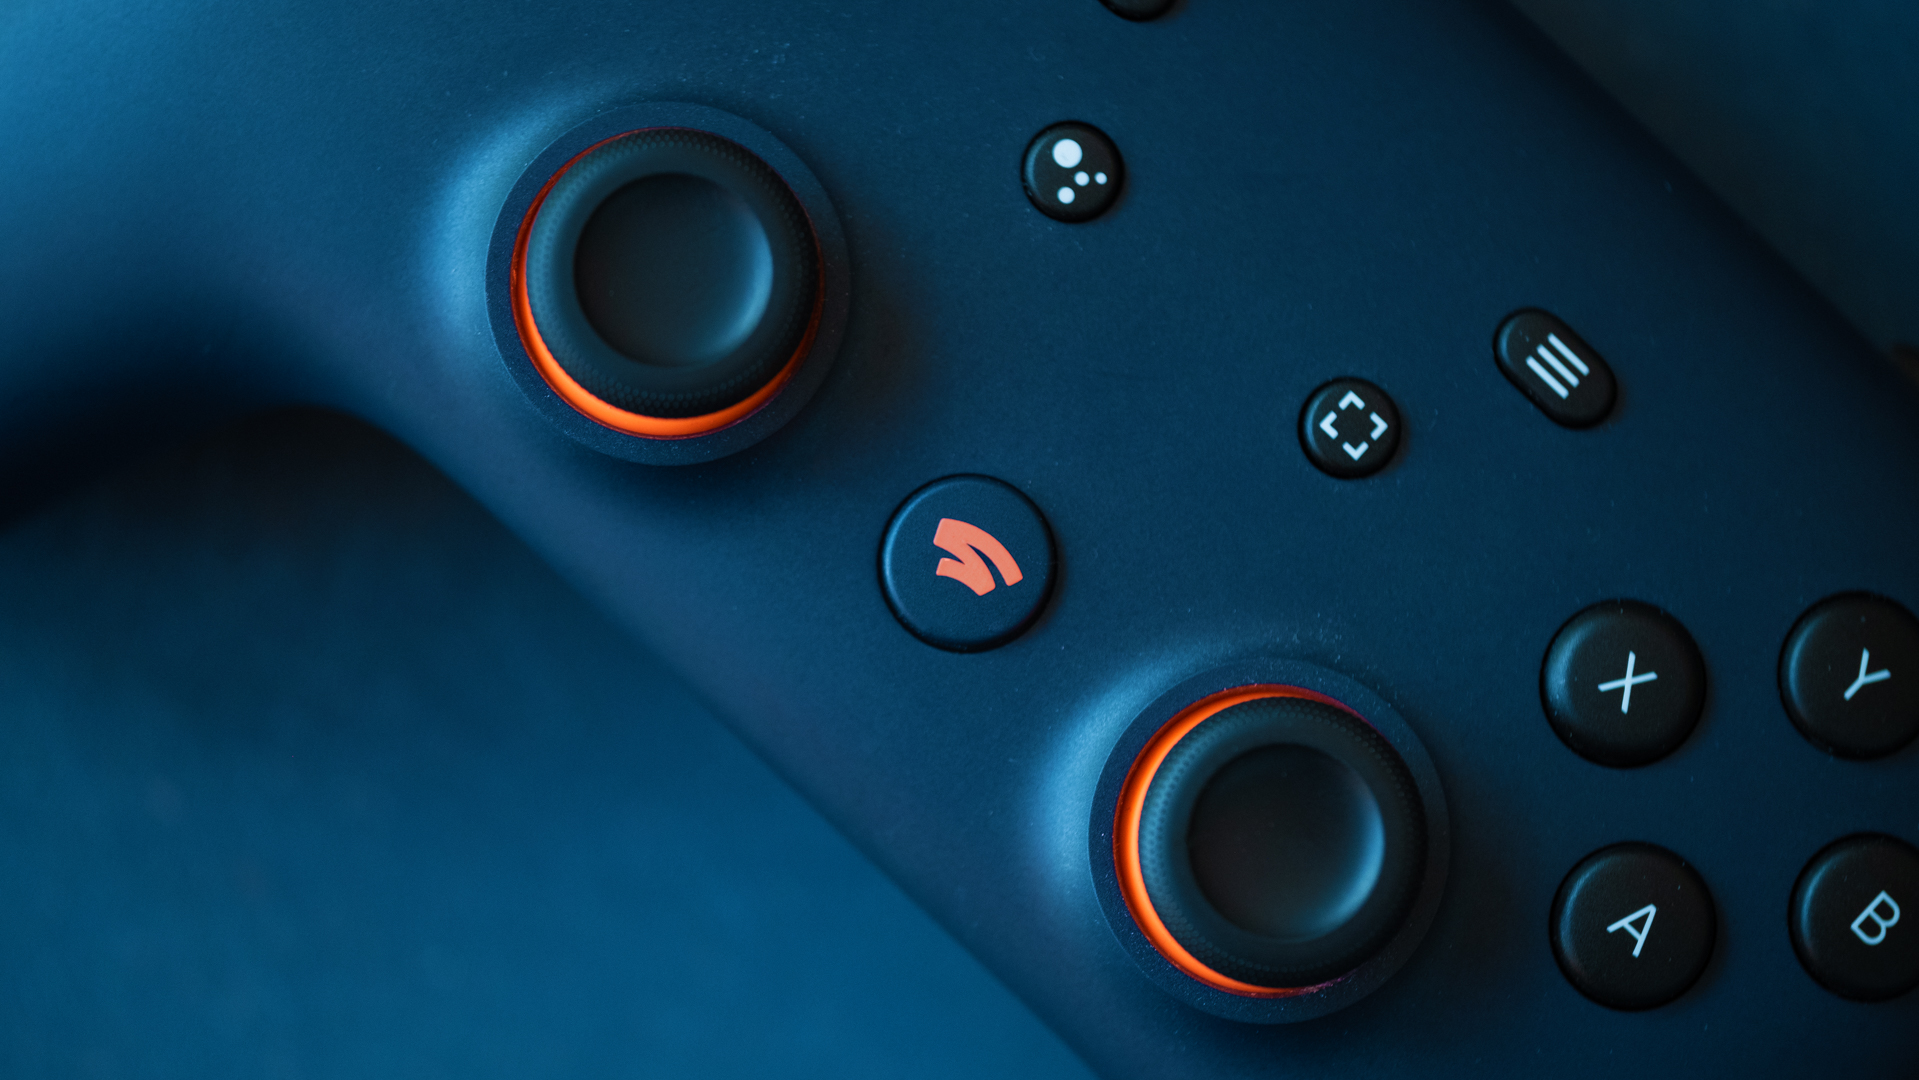 Google Stadia controller on table close up shot.